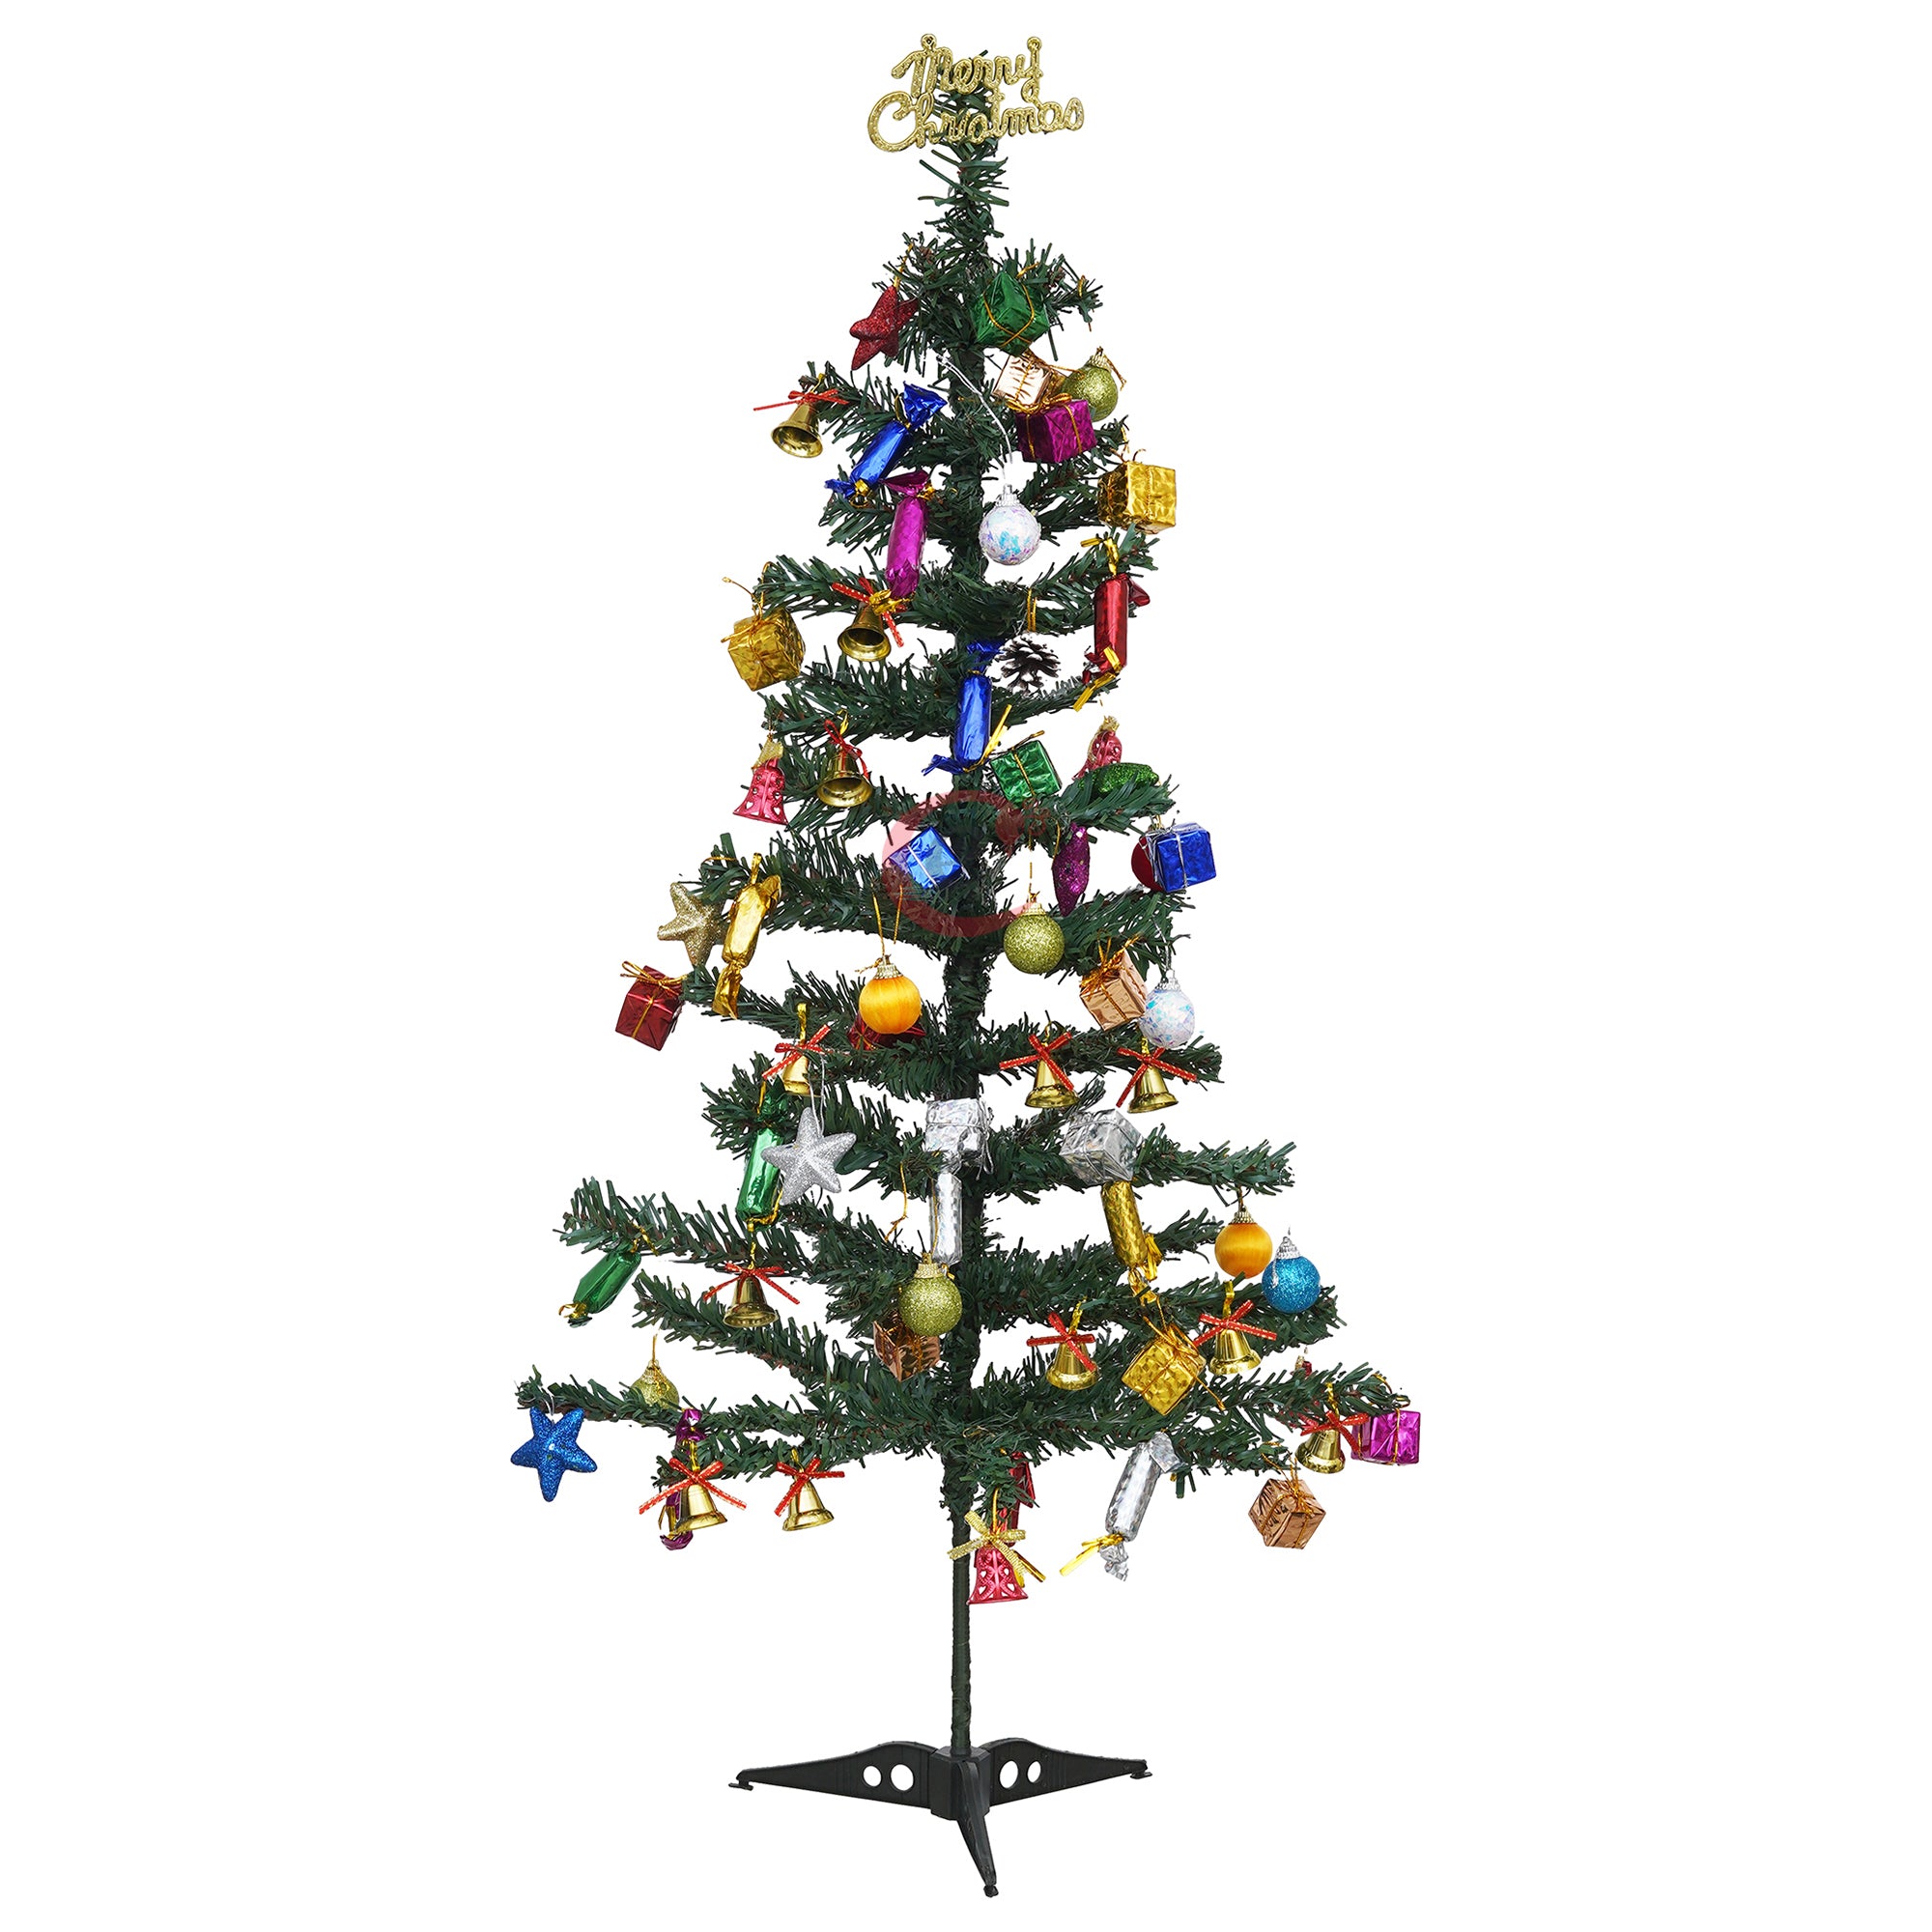 eCraftIndia 4 Feet Green Artificial Christmas Tree Xmas Pine Tree with Metal Stand - Xmas Tree for Indoor, Outdoor, Home, Living Room, Office, Church Decor - Merry Christmas Decoration Item… 7